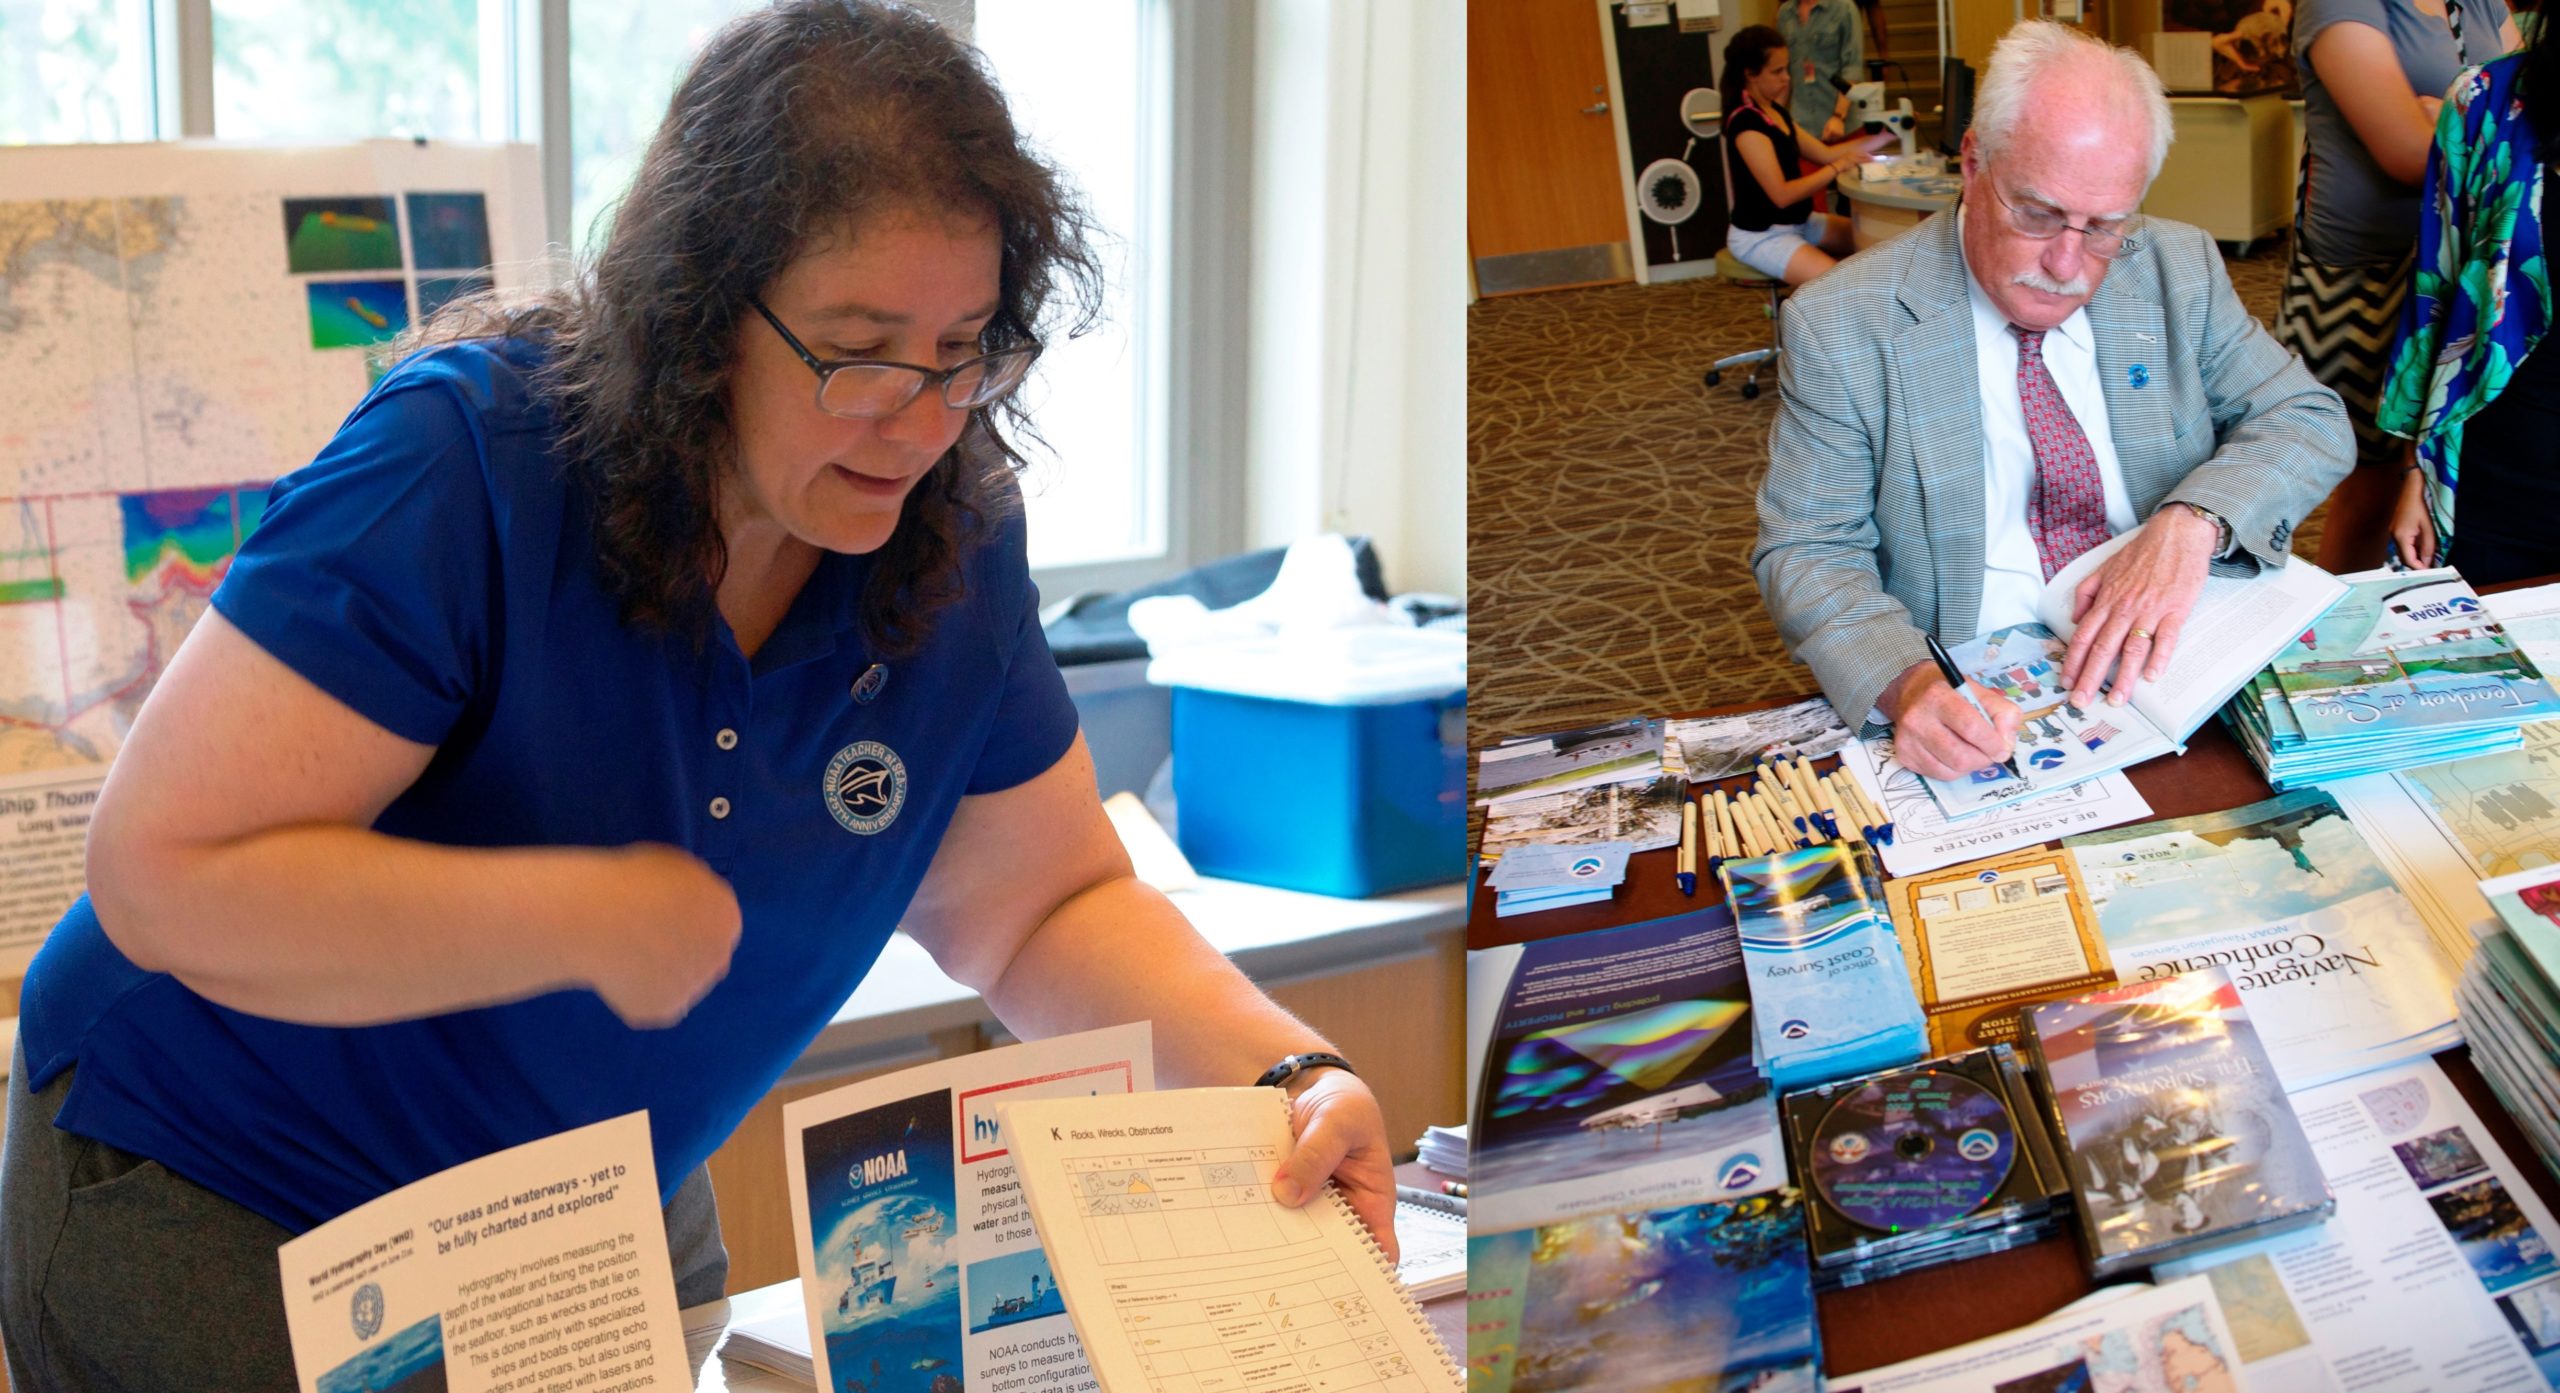 On the left there is a woman sharing activities material and there are photographs behind her. On the right a man is sitting and signing books at a table that is filled with other books and materials.